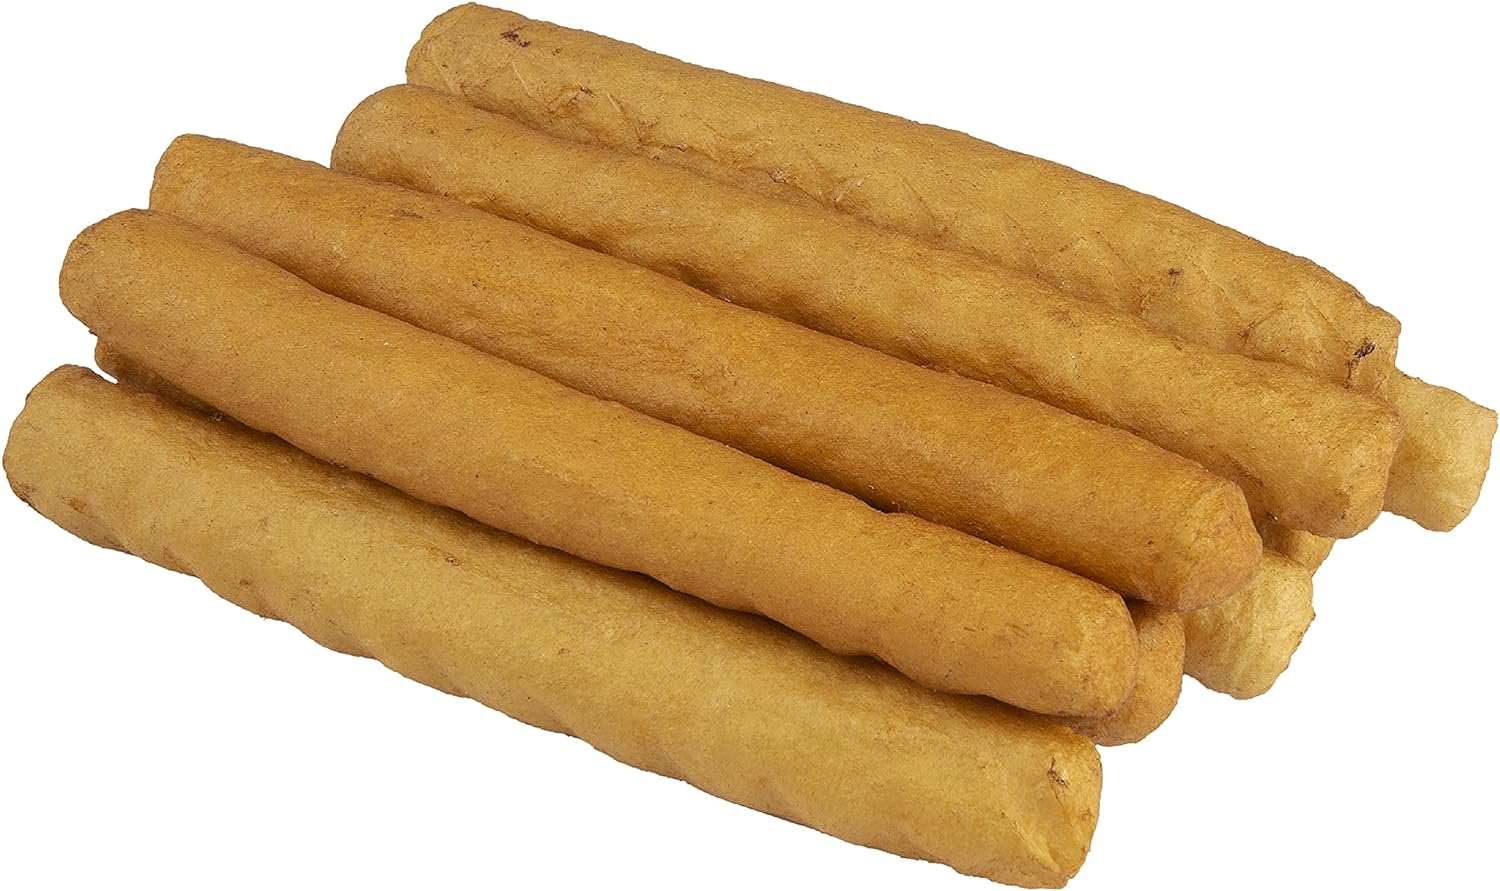 Better Belly Highly Digestible Rawhide Large Roll Chews, Treat Your Dog to a Chew with NO Artificial Colors or Flavors : Pet Supplies